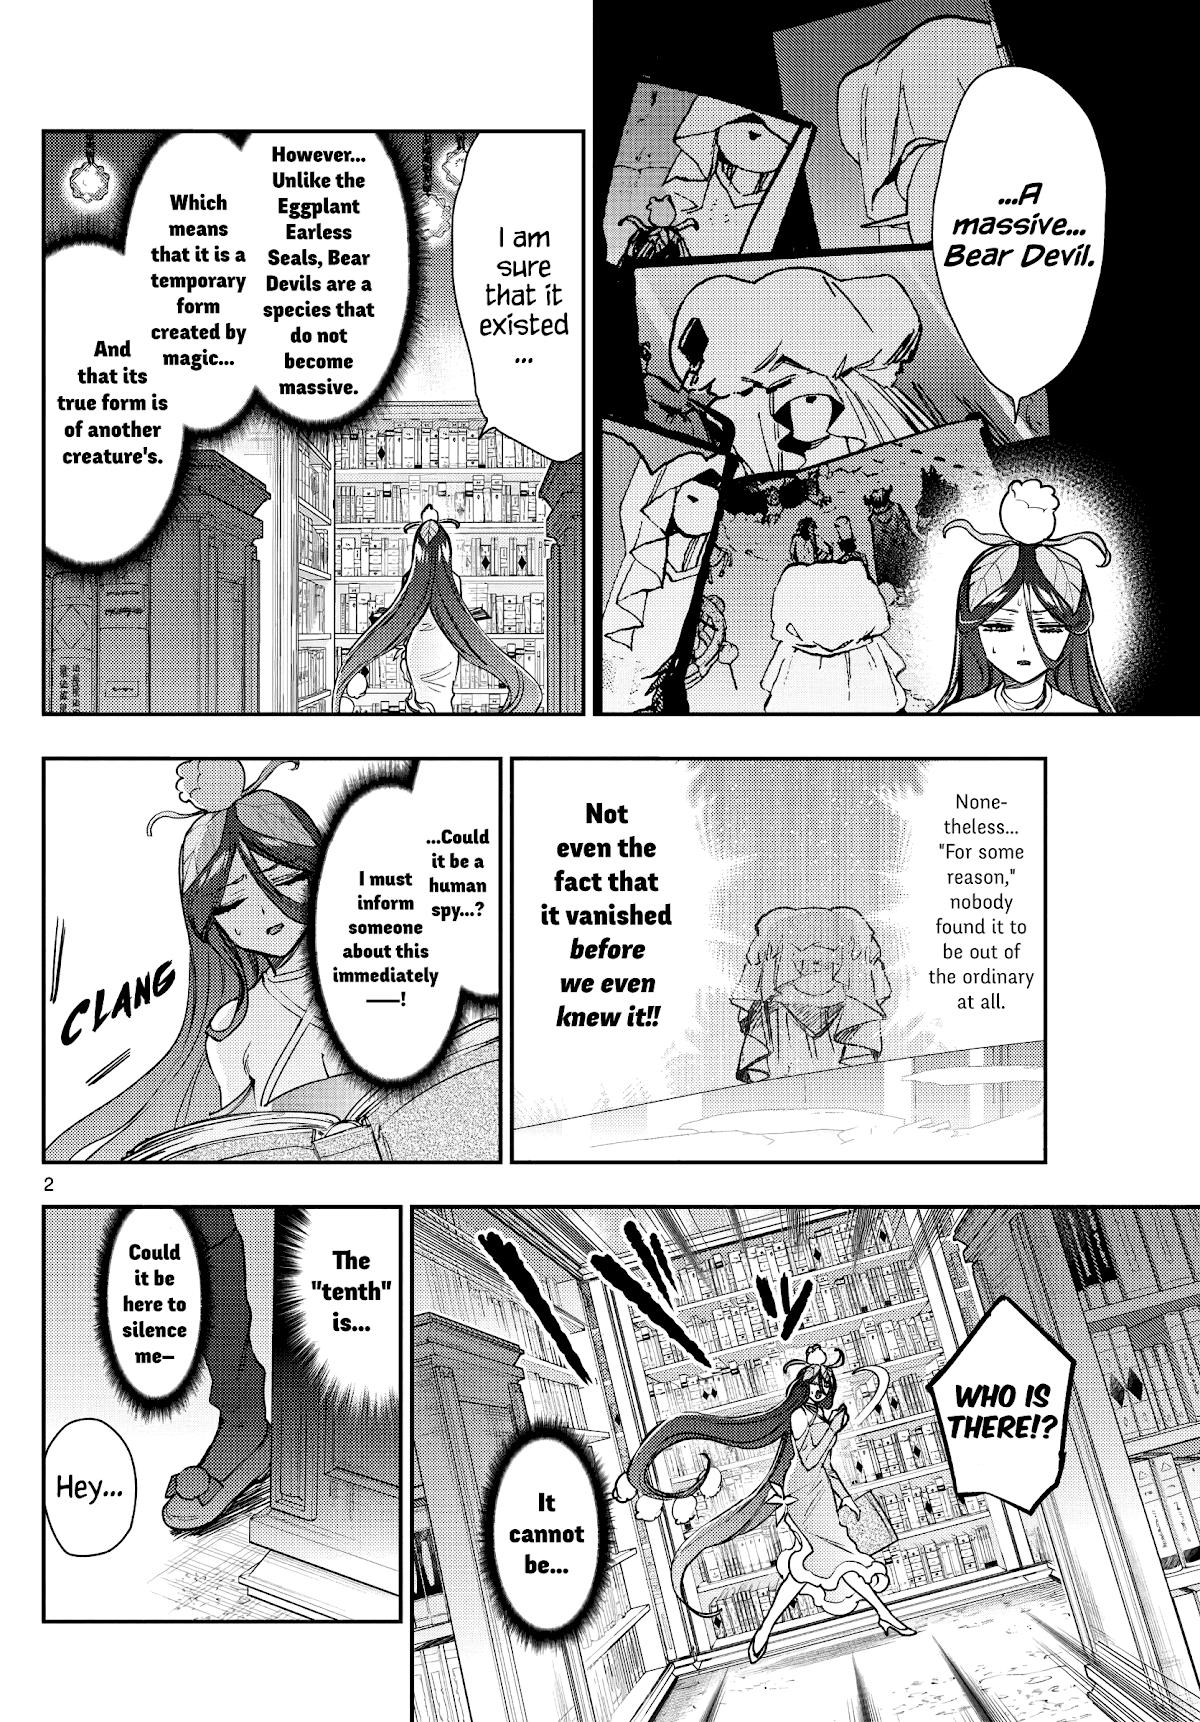 Maou-Jou De Oyasumi Chapter 262: Does That Mean There Is A Big Bear Devil? page 2 - Mangakakalot